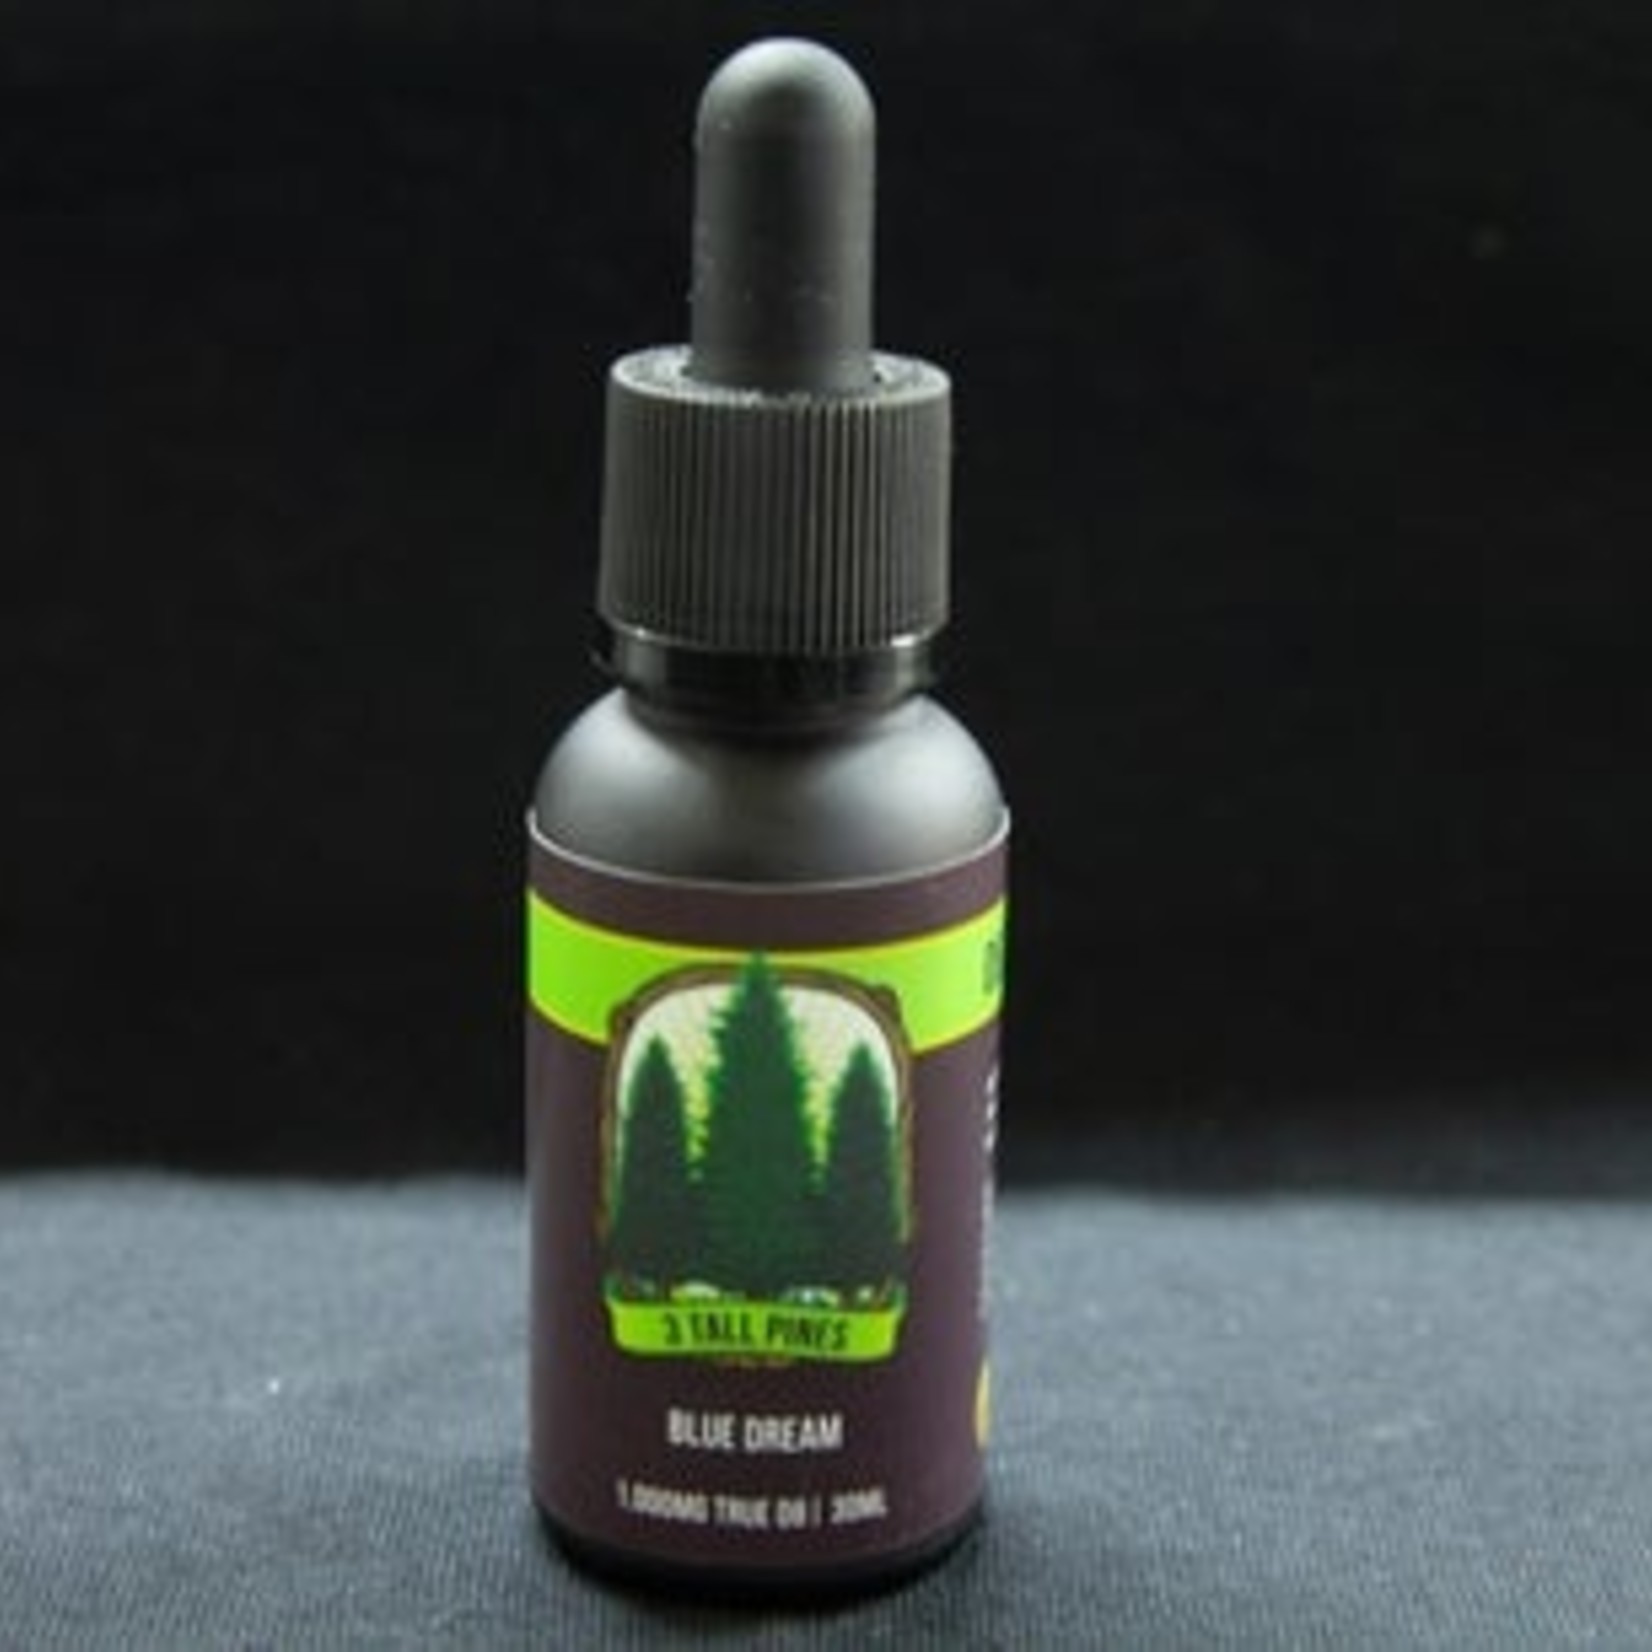 3 TALL PINES 3 TALL PINES DELTA 8 TINCTURE (BLUE DREAM)